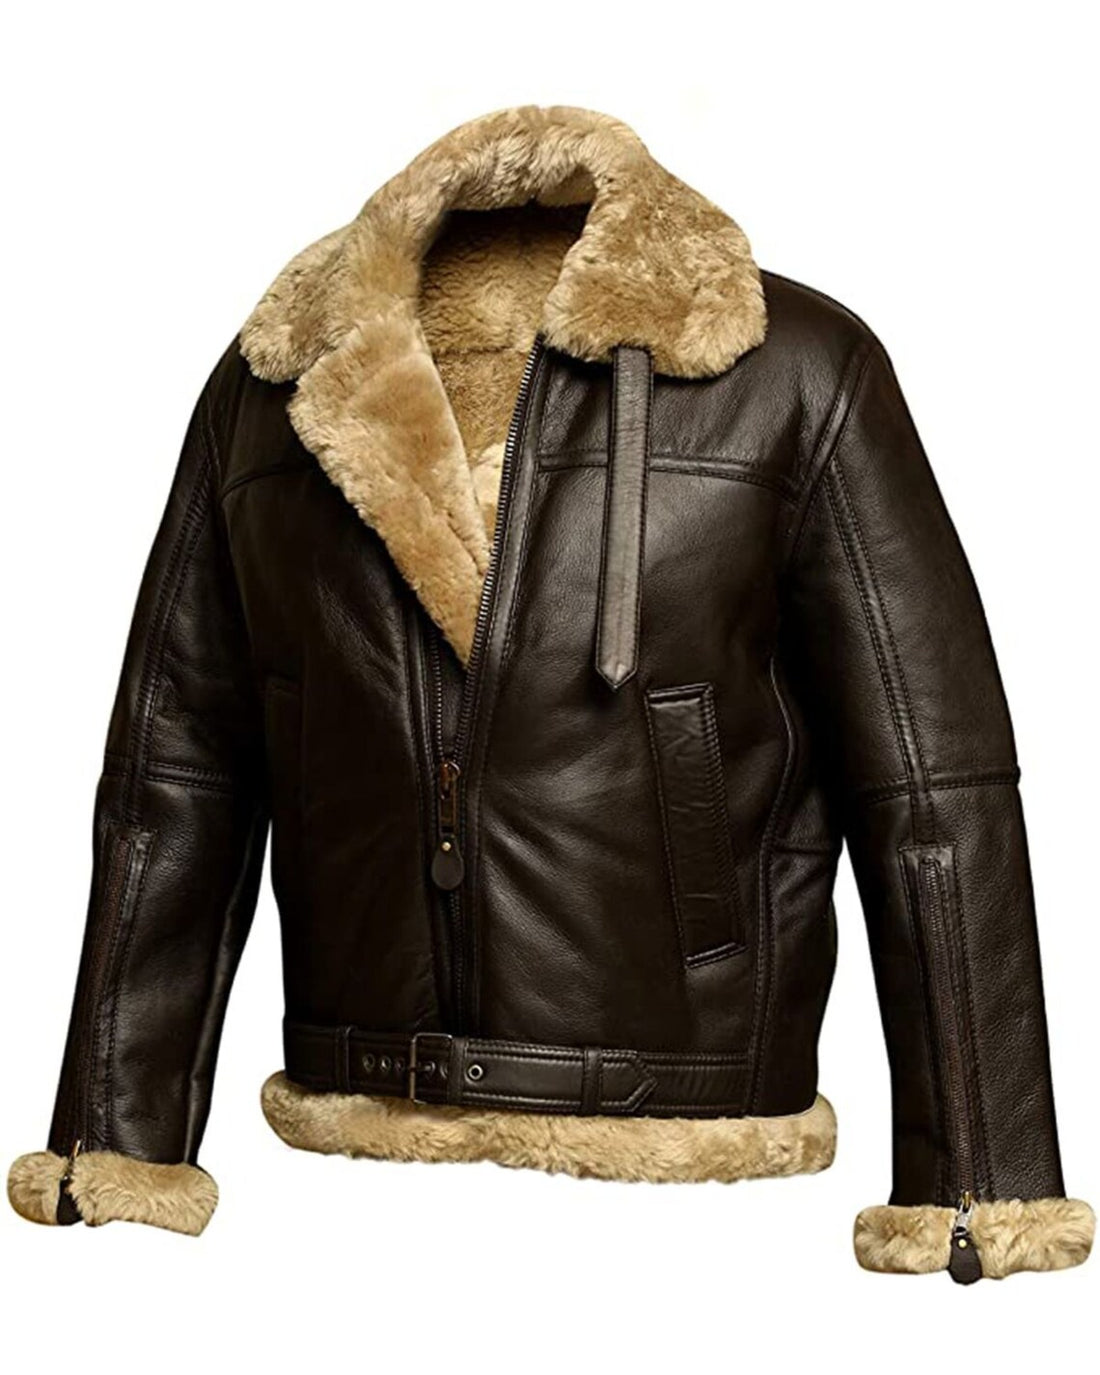 Skin Shearling Fur-Lined Black Leather Jacket – Chamra Handcrafted